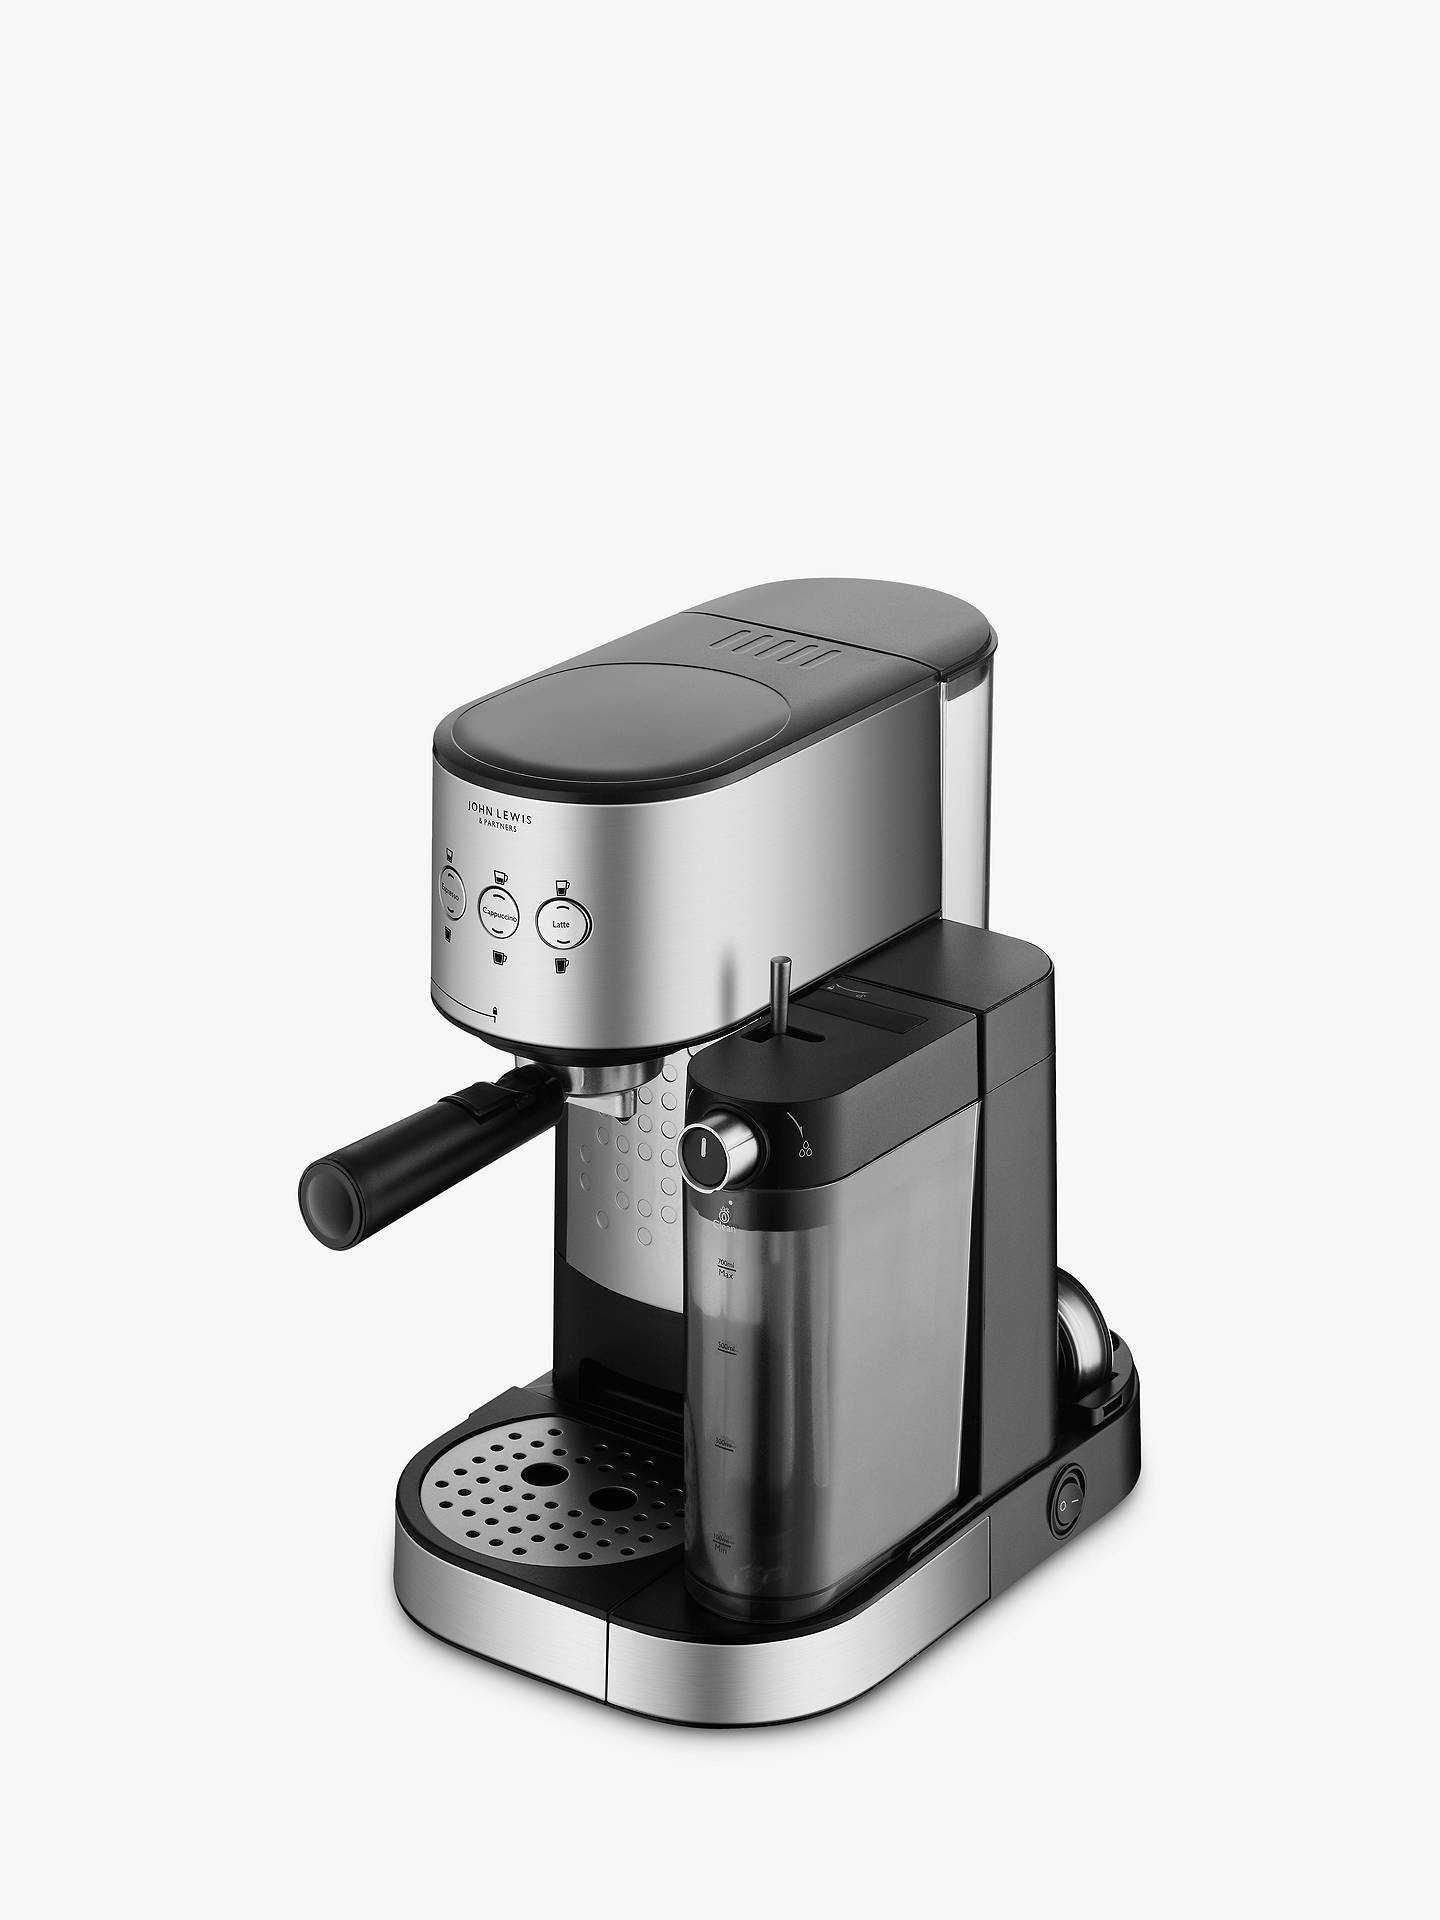 Combined RRP £150 Lot To Contain Boxed John Lewis Pump Espresso Coffee Machine With Integrated Milk